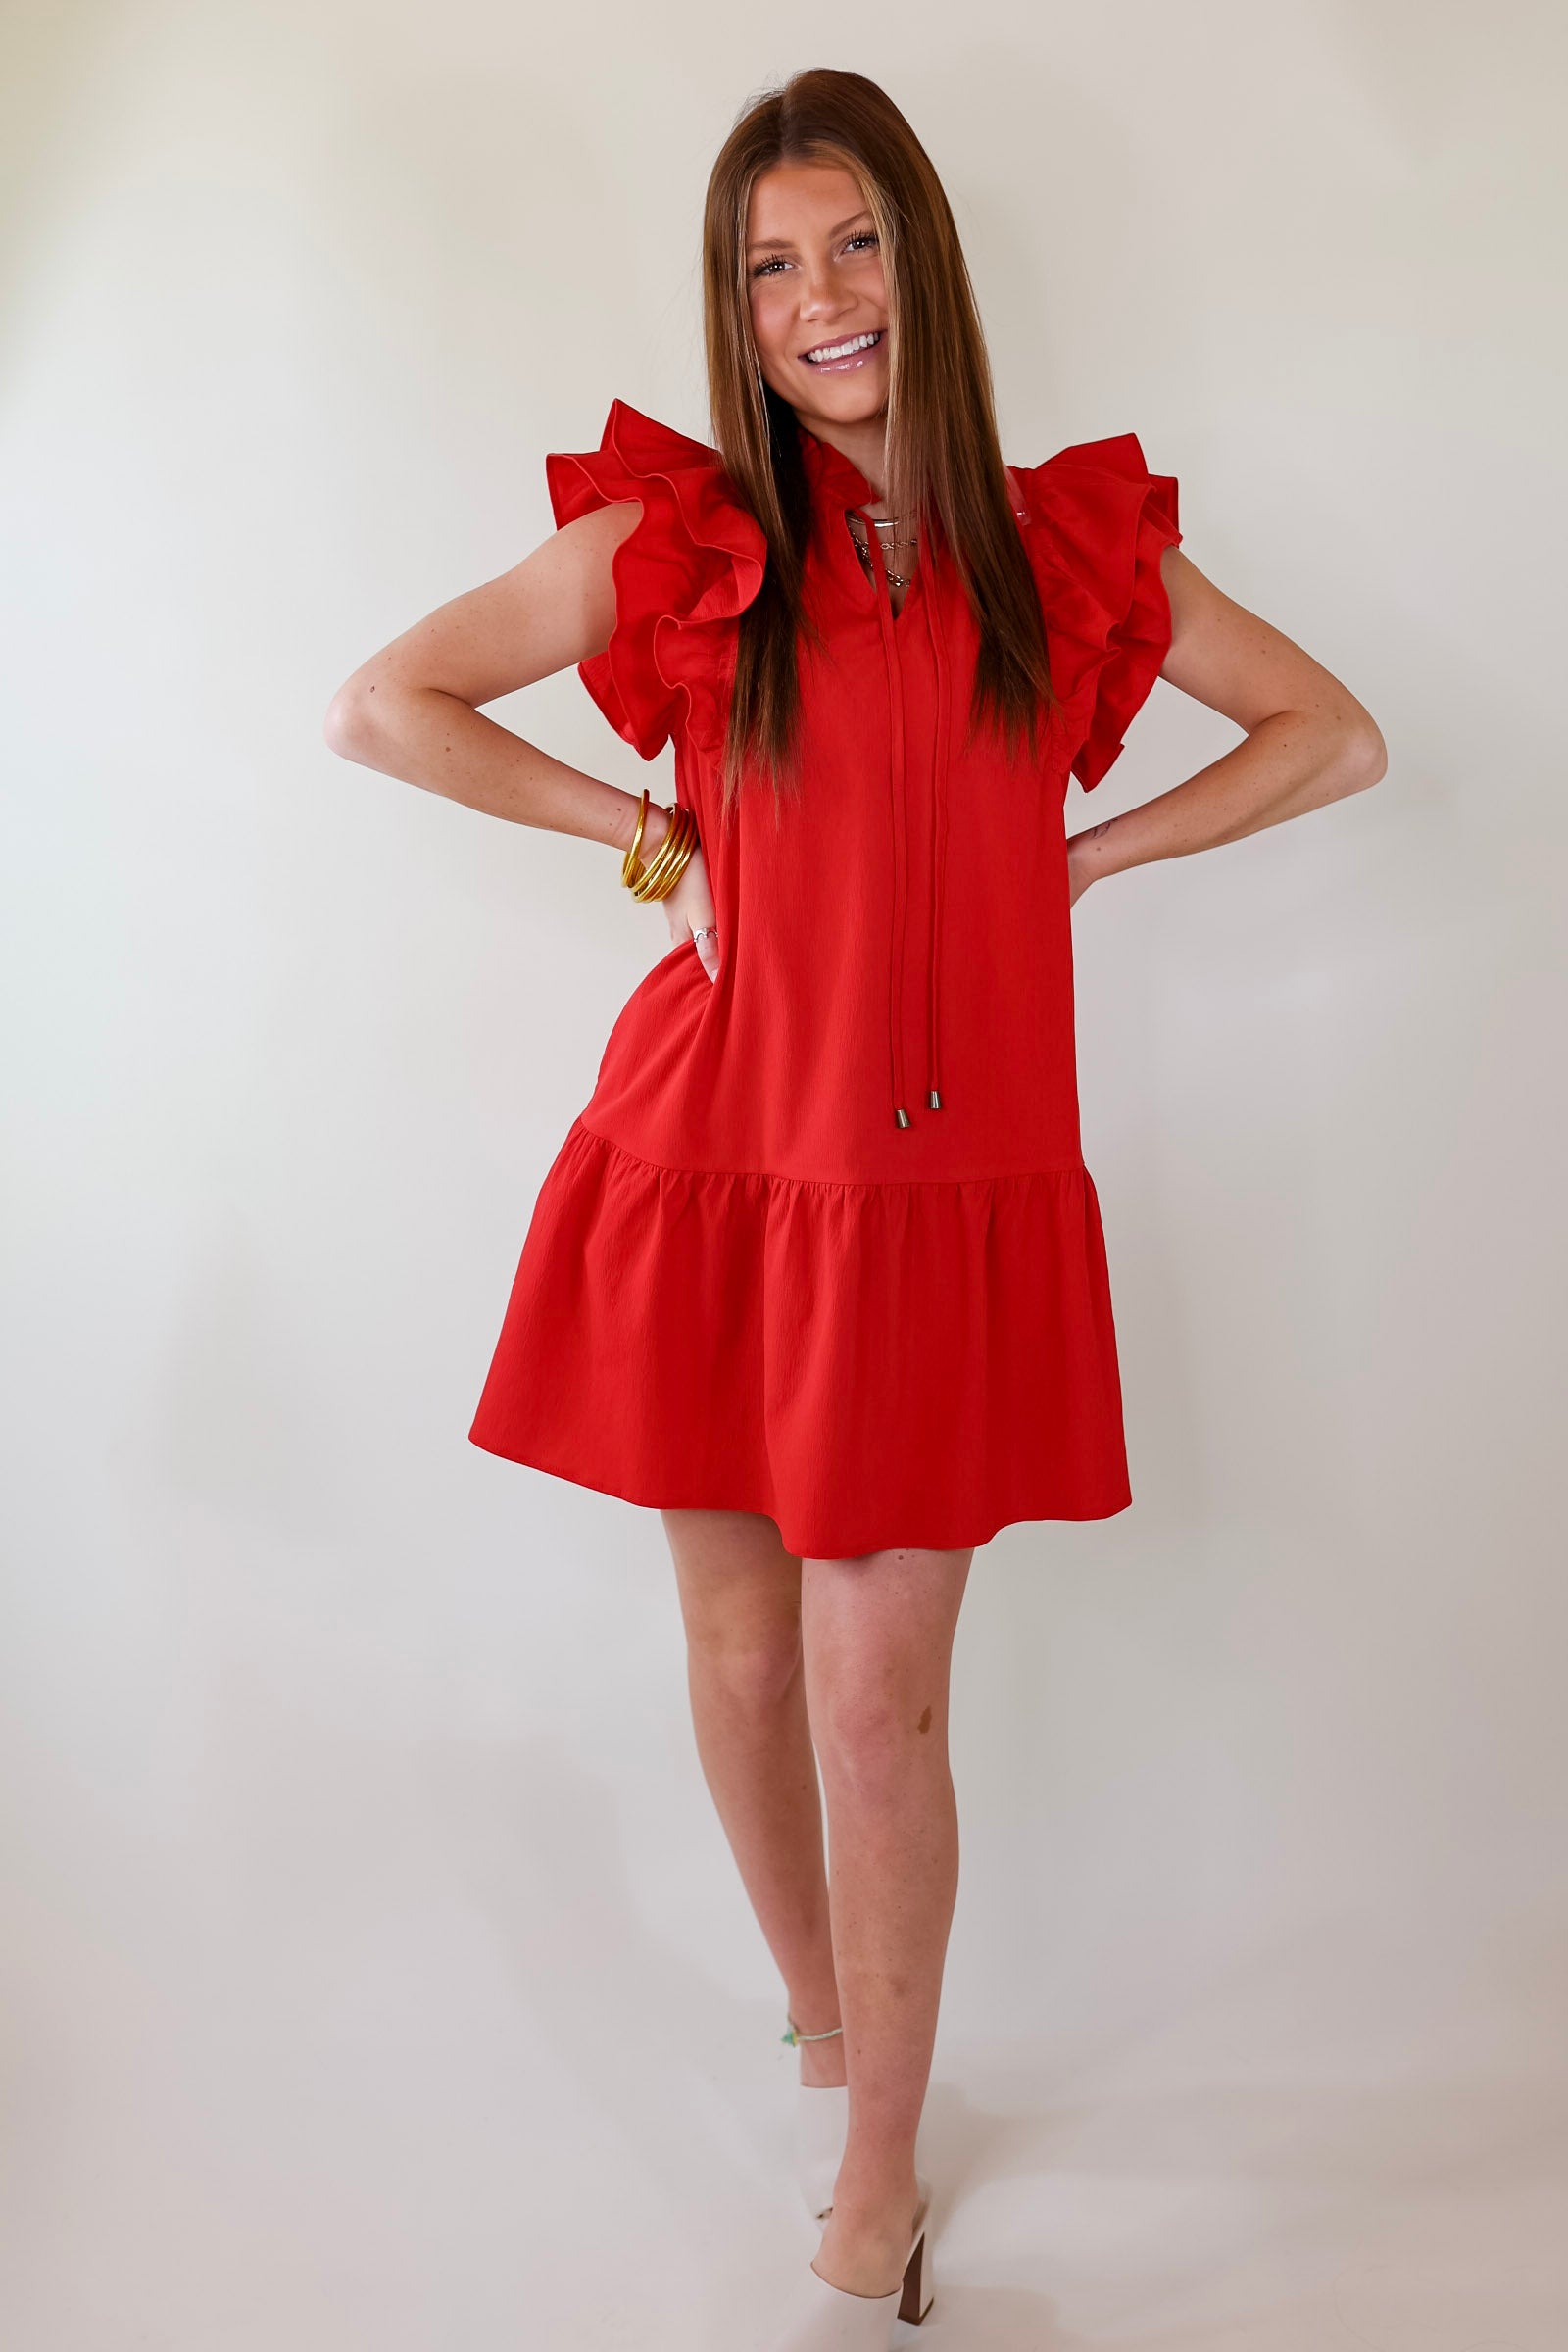 Powerful Love Ruffle Cap Sleeve Dress with Keyhole and Tie Neckline in Red - Giddy Up Glamour Boutique